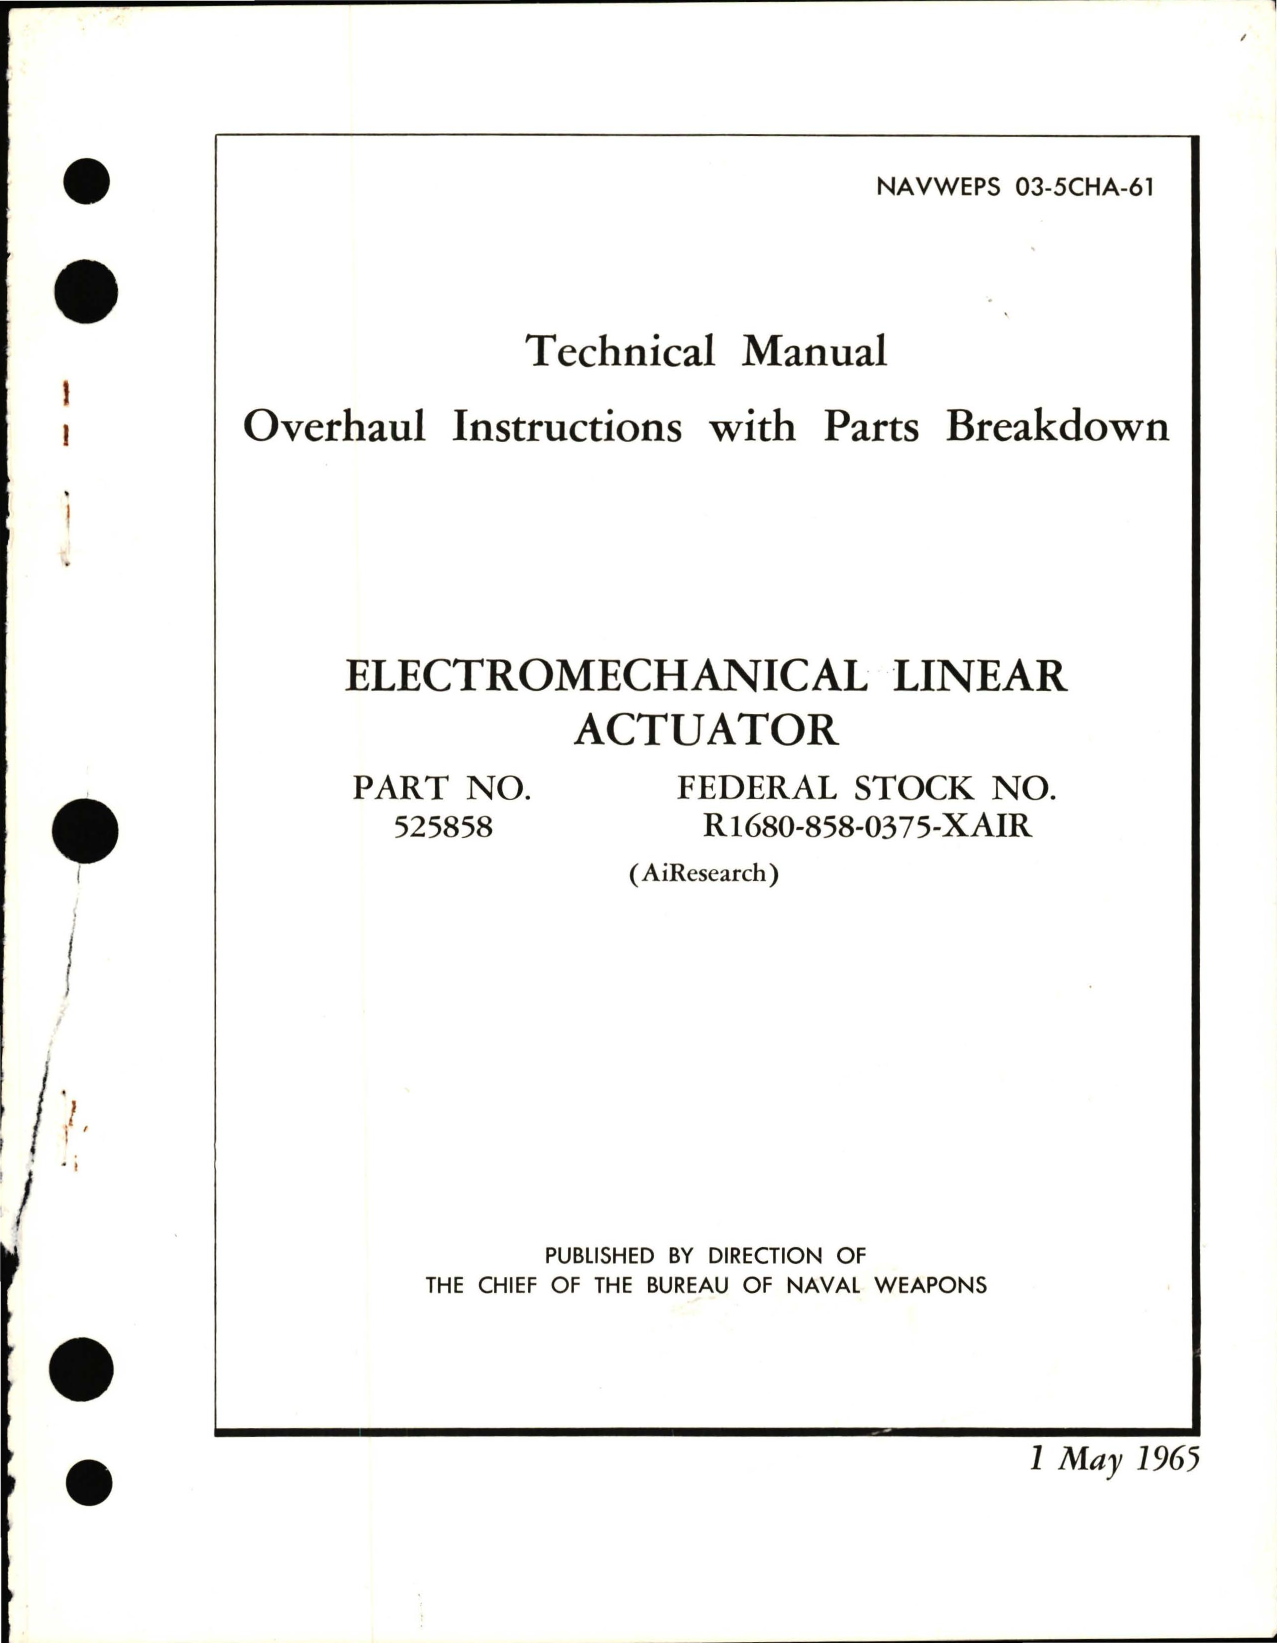 Sample page 1 from AirCorps Library document: Overhaul Instructions with Parts Breakdown for Electromechanical Linear Actuator - Part 525858 